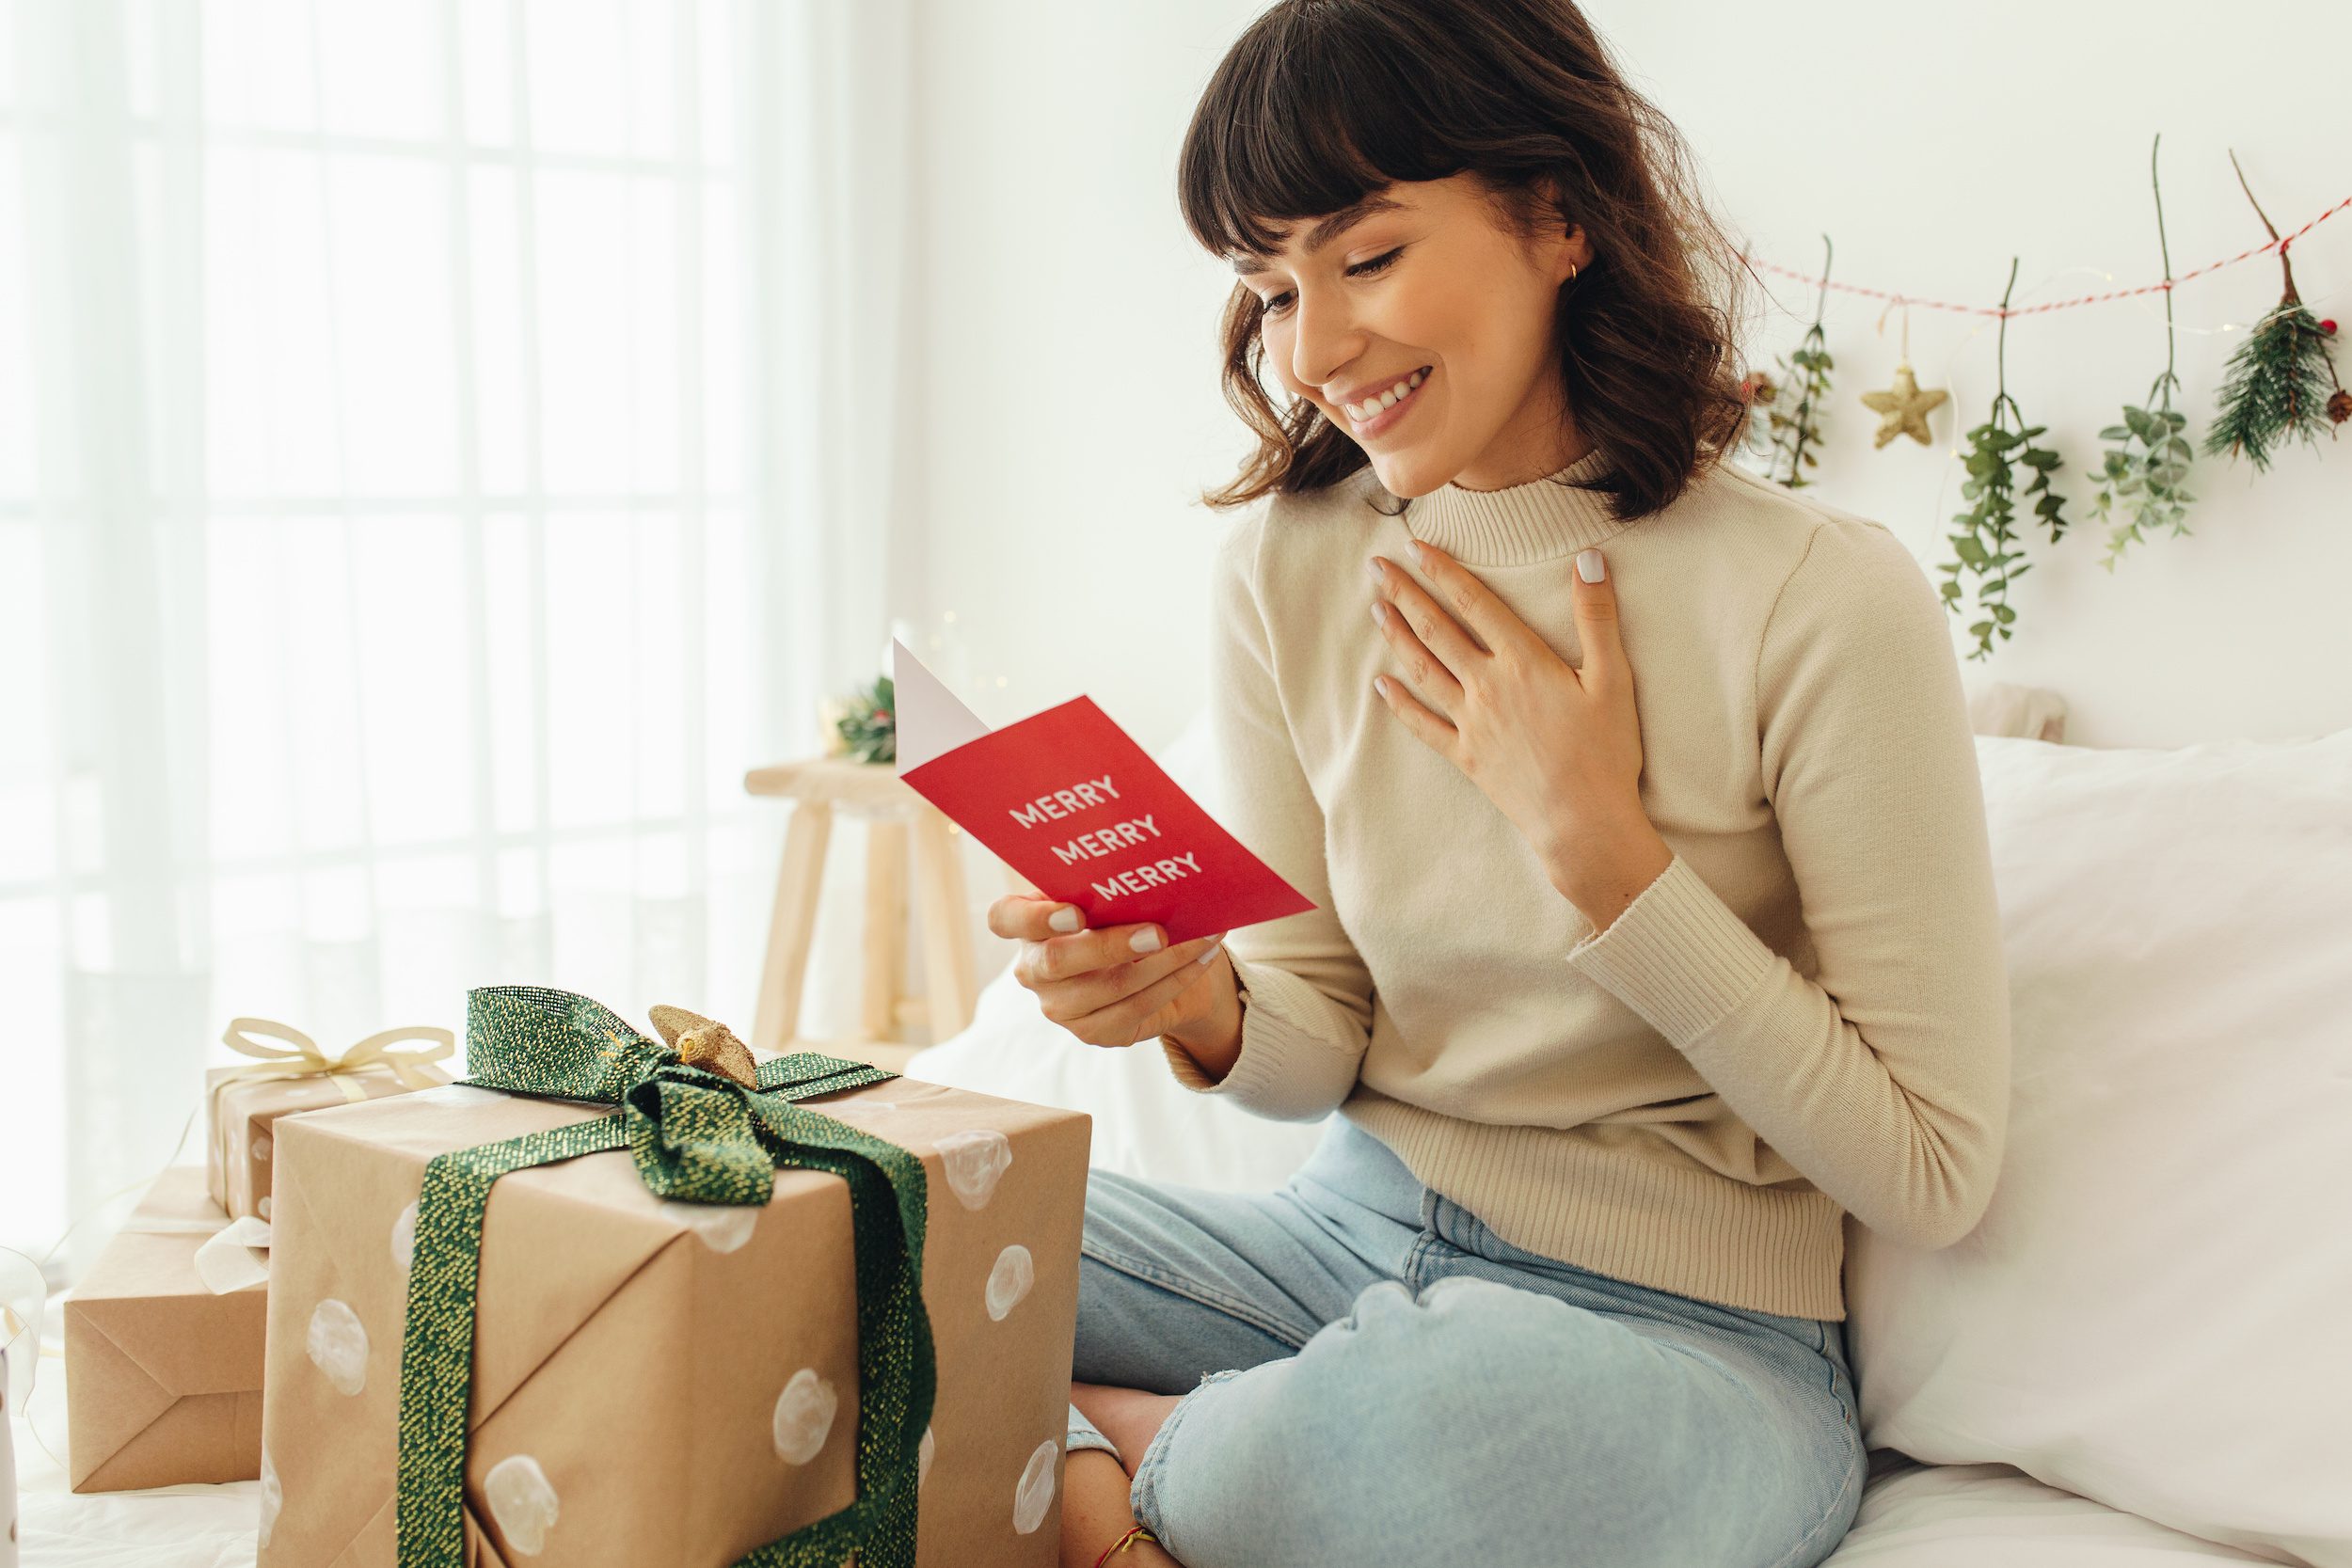 Close up of woman sitting on bed with Christmas present. Smiling woman holding a Christmas card.